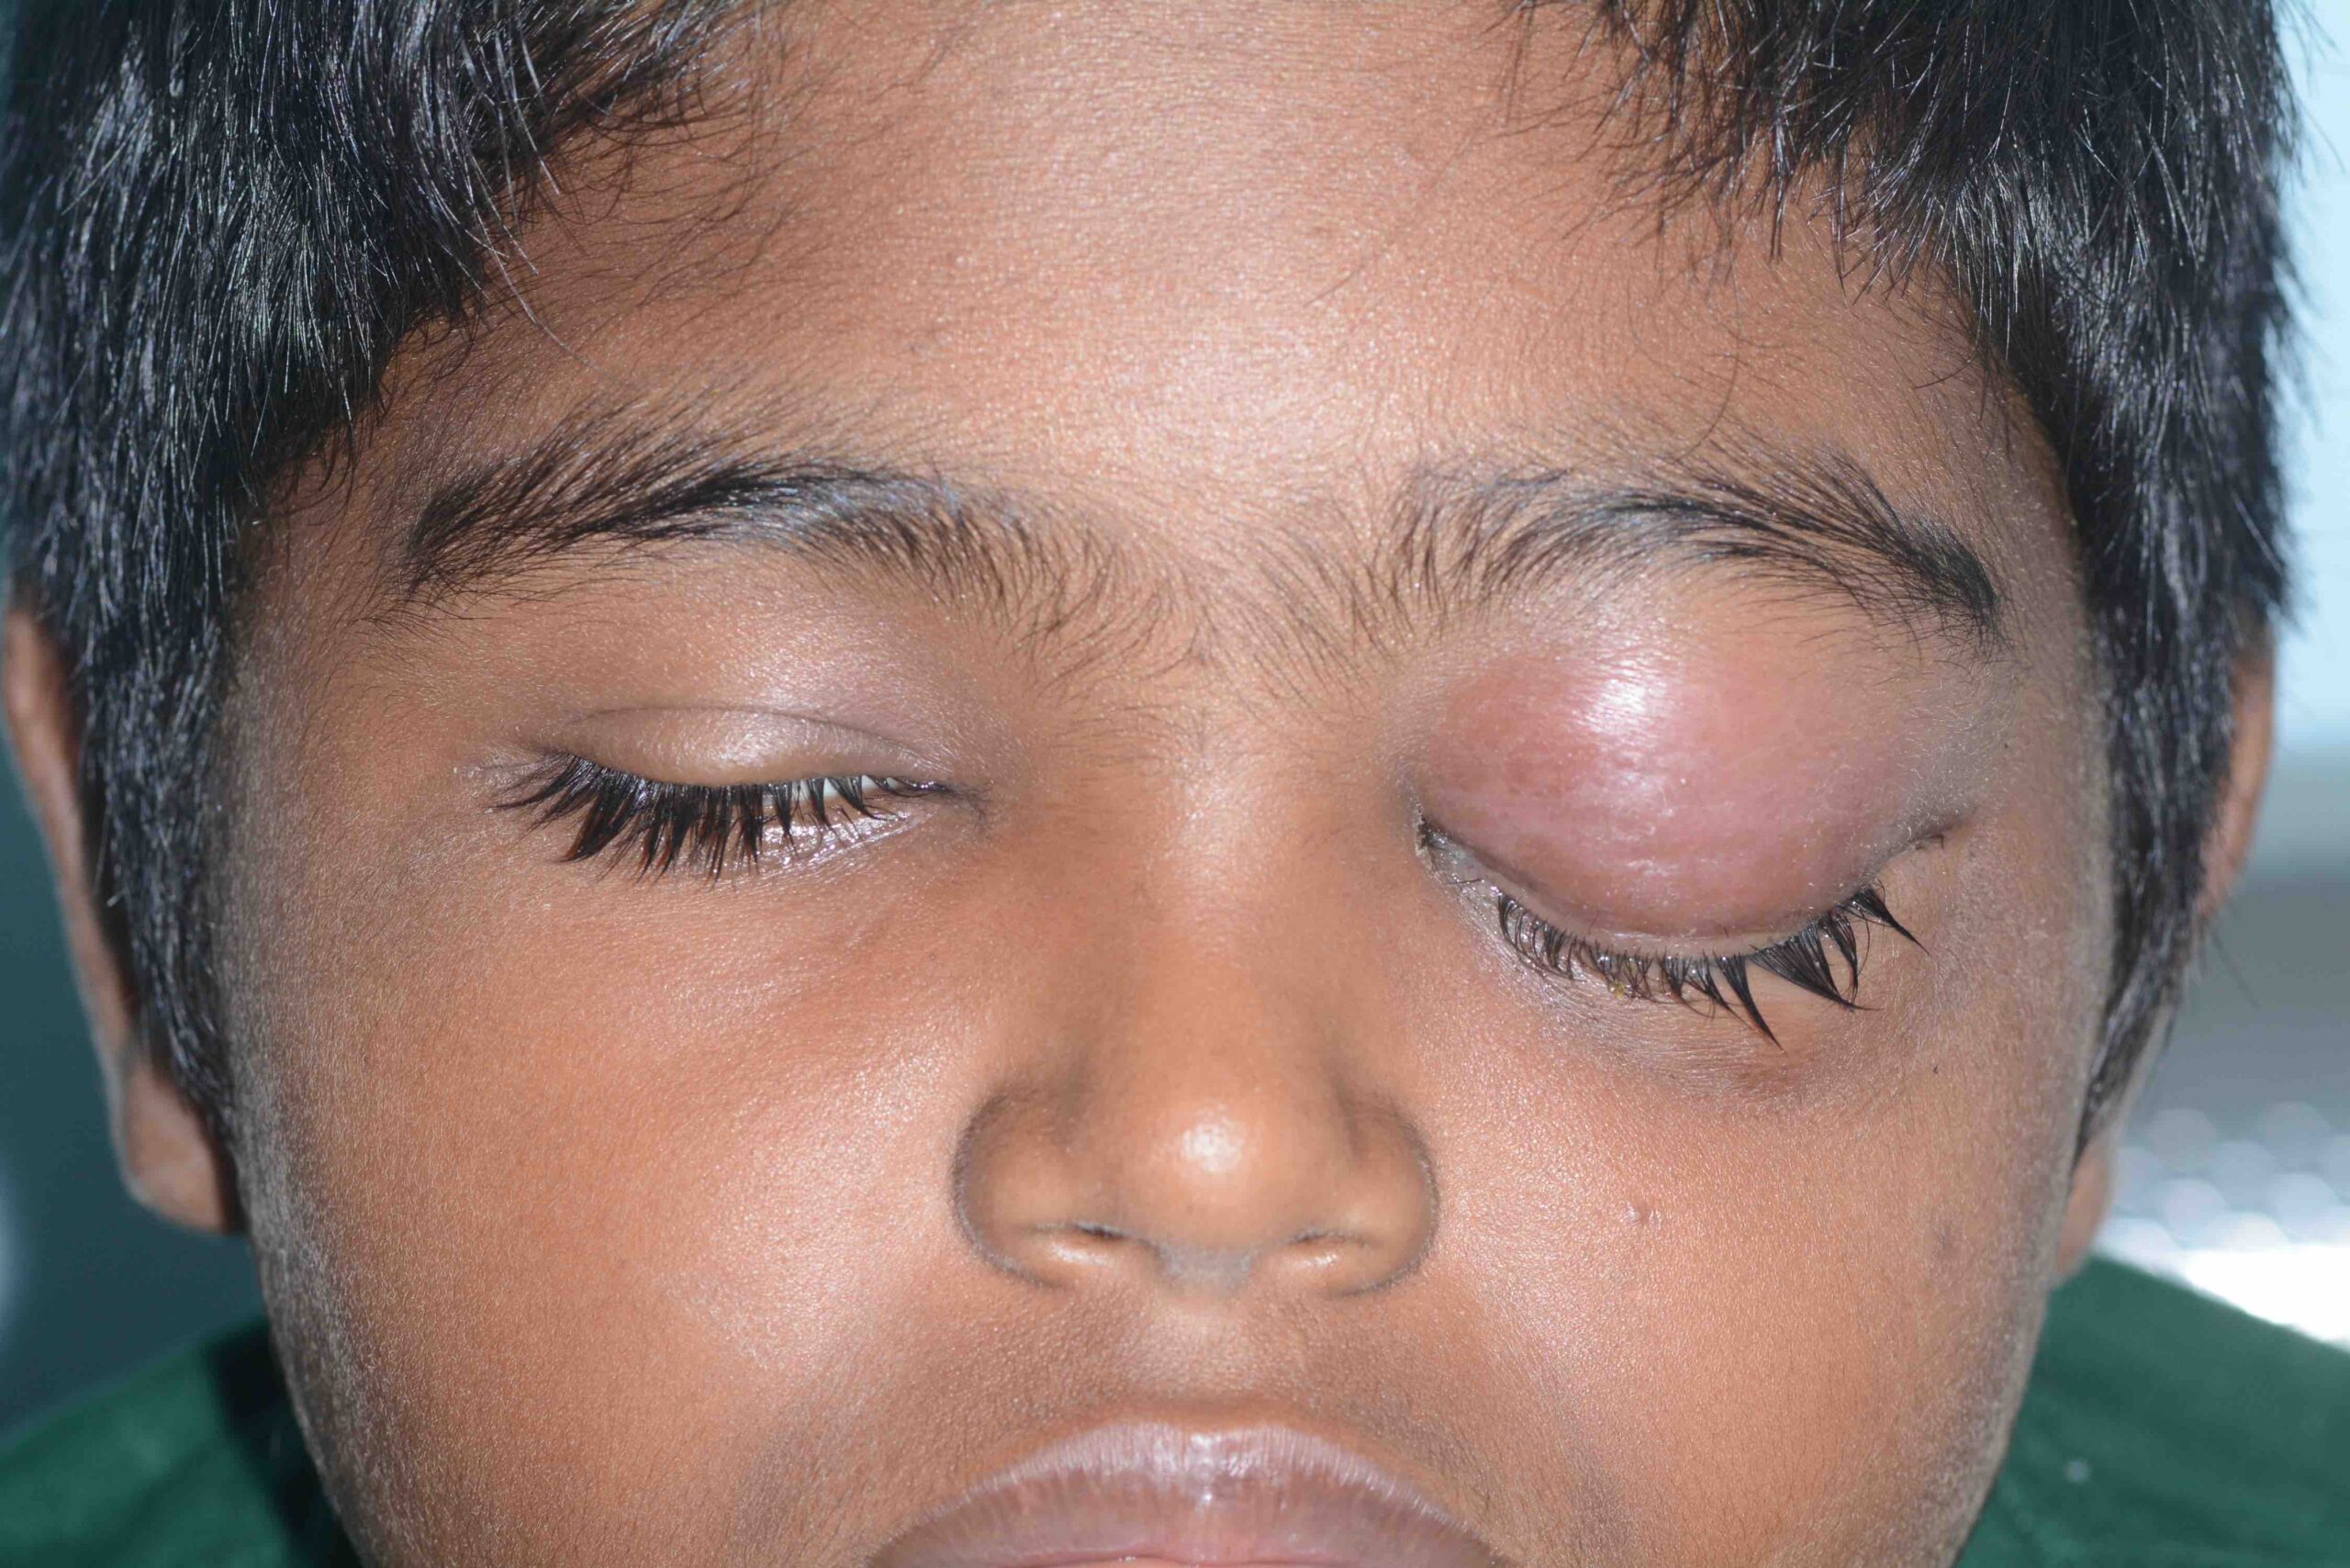 A child with orbital cellulitis who was admitted for treatment. INDIA (Photo:©Aravind eye care CC BY-NC-SA 4.0)